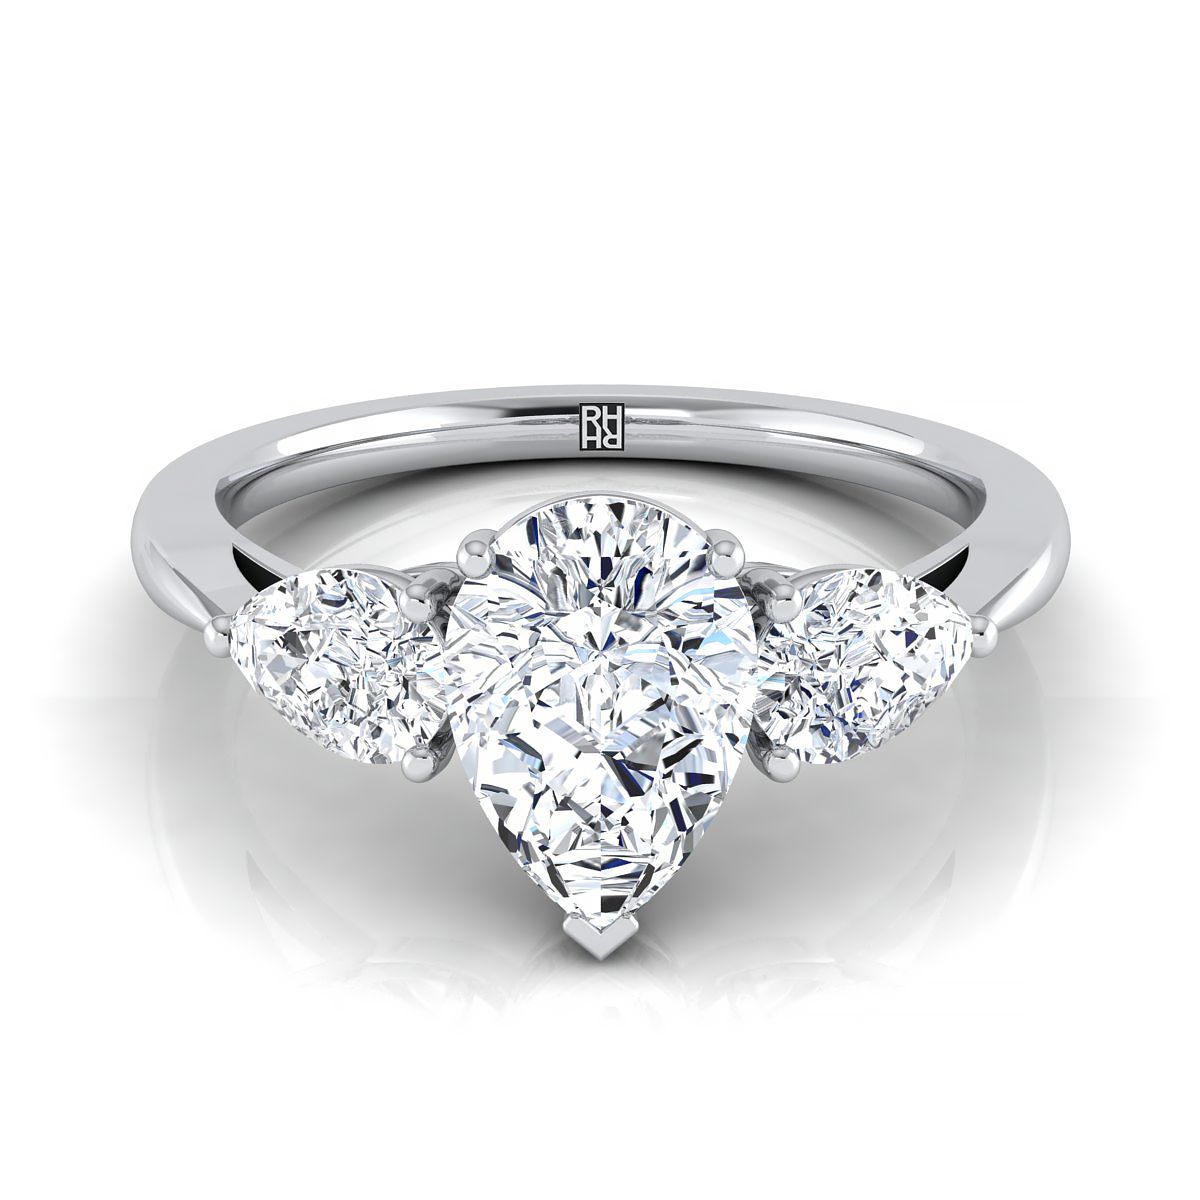 18K White Gold Pear Shape Center Diamond Perfectly Matched Pear Shaped Three Diamond Engagement Ring -7/8ctw